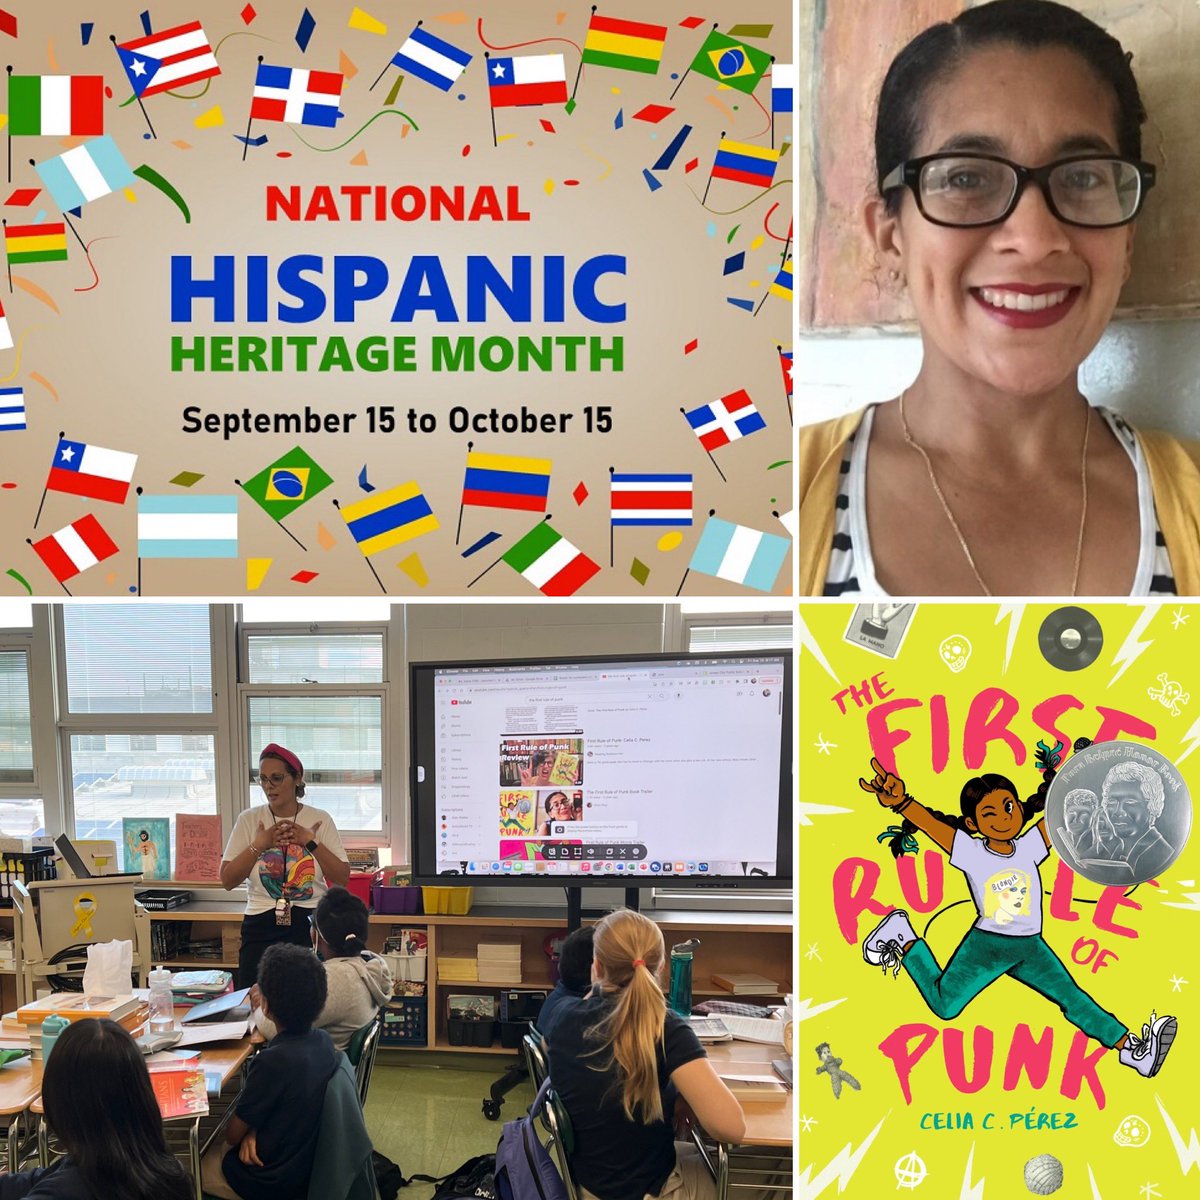 Today we kicked off National Hispanic Heritage Month with our first chapter Fridays! Our instructional coach read to our students, The First Rule of Punk, by @CeliaCPerez Now our students are excited to make their our zines! #MS4Falcons #NationalHispanicHeritageMonth